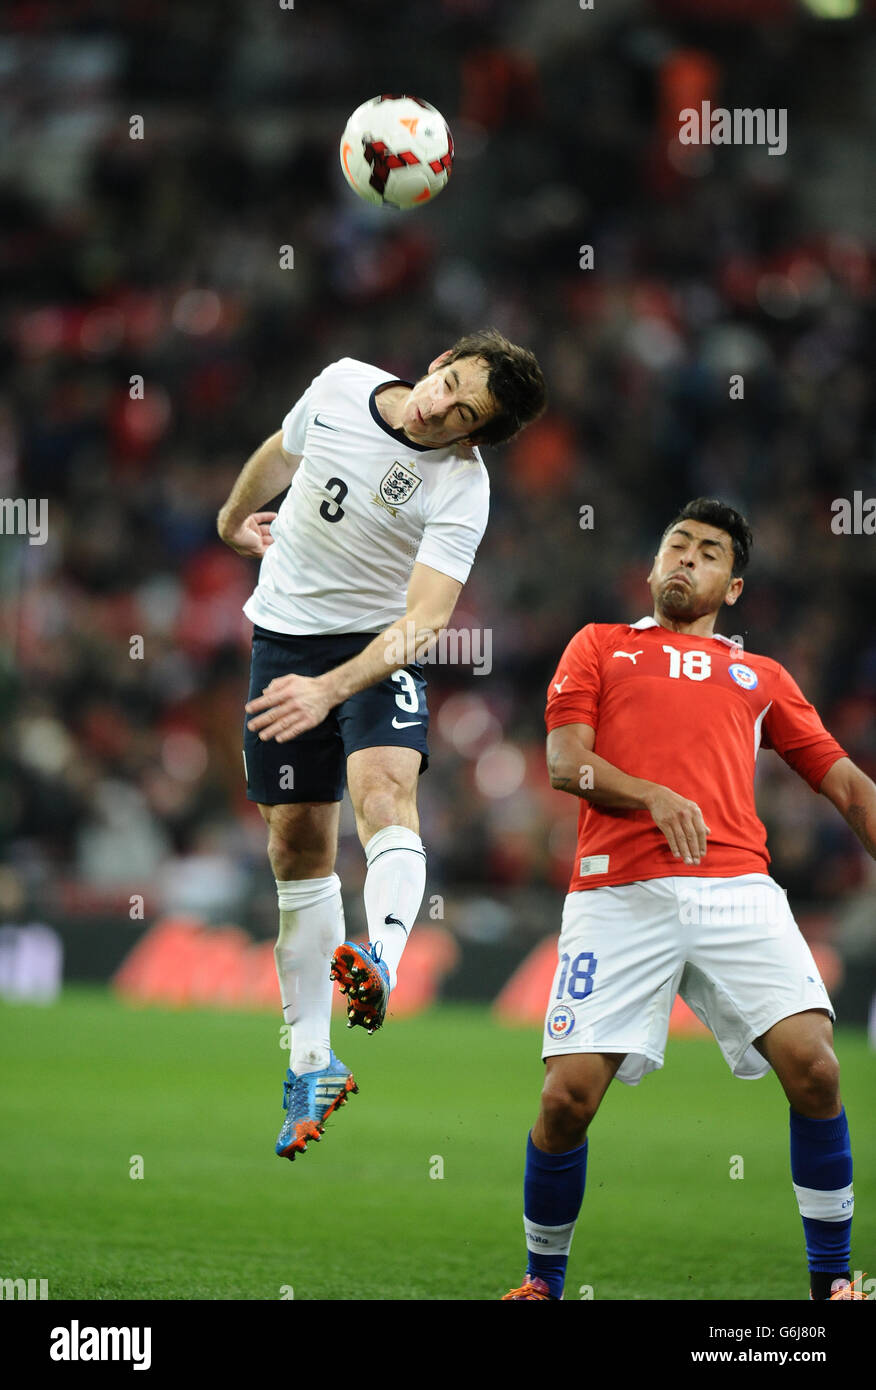 Soccer - International Friendly - England v Chile - Wembley Stadium. England's Leighton Baines wins the ball in air from Chile's Gonzalo Jara Stock Photo